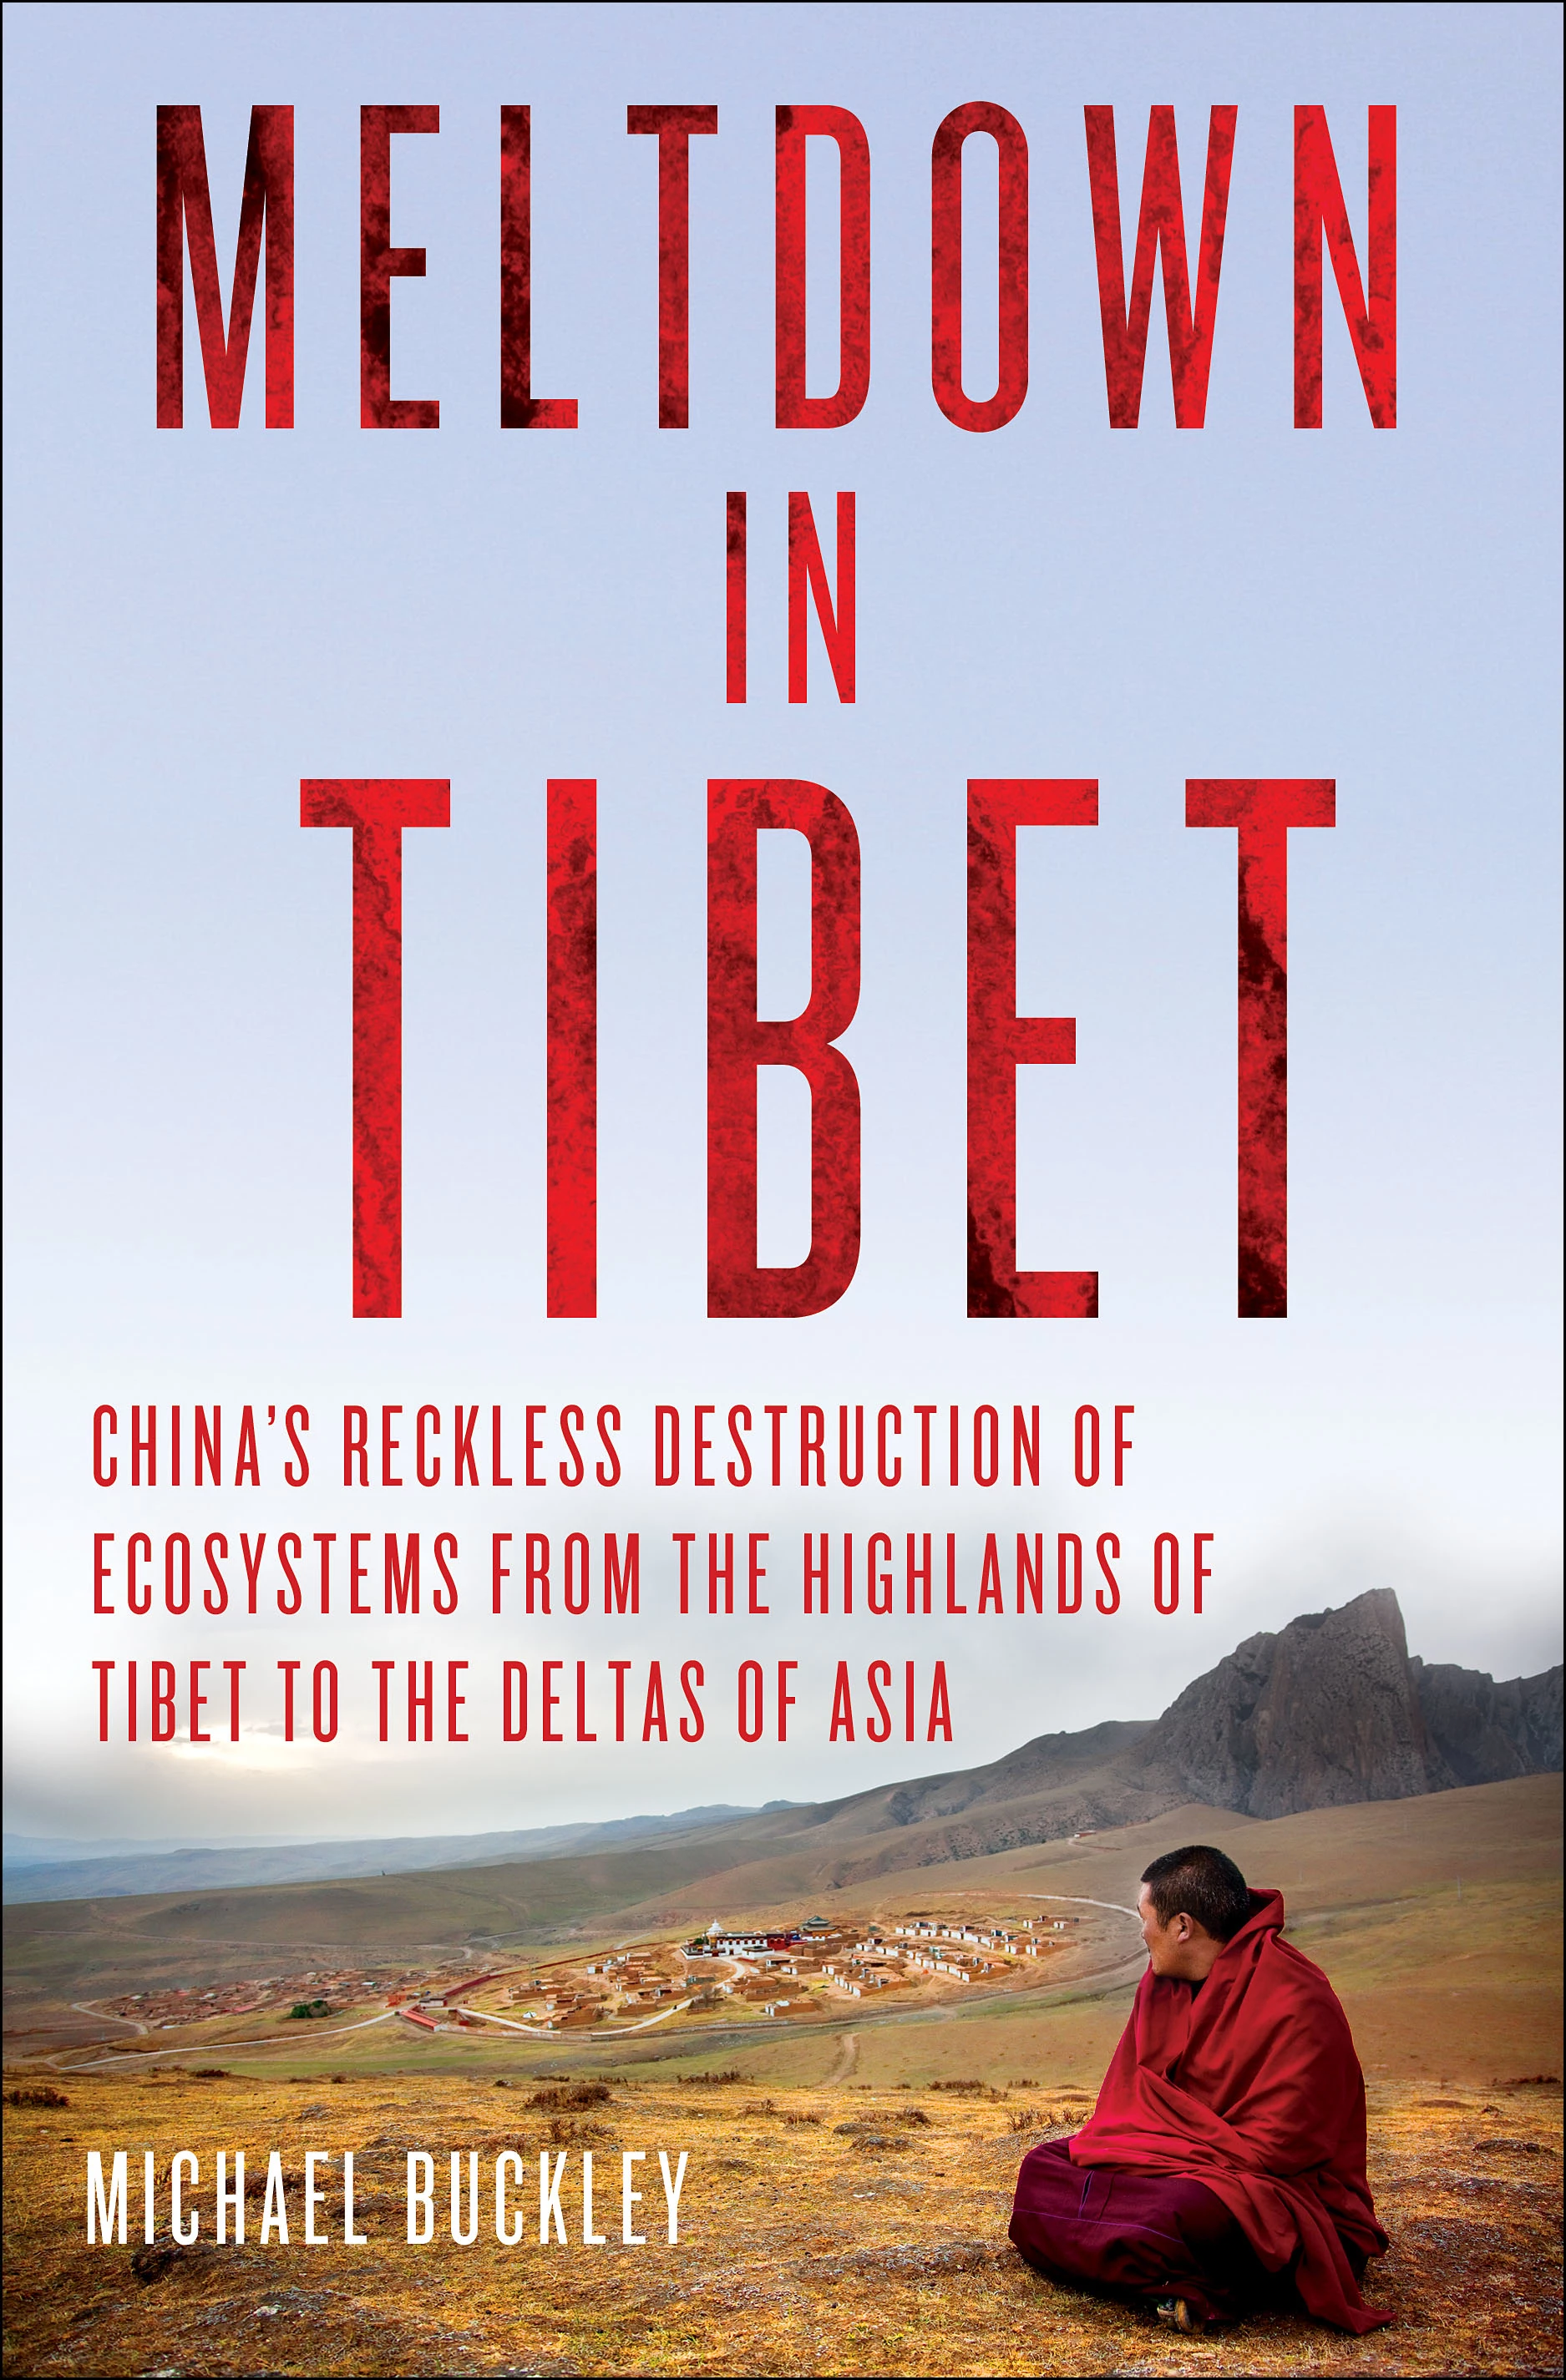 ‘Meltdown in Tibet: China's Reckless Destruction of Ecosystems from the Highlands of Tibet to the Deltas of Asia’ by Michael Buckley (Palgrave Macmillan)